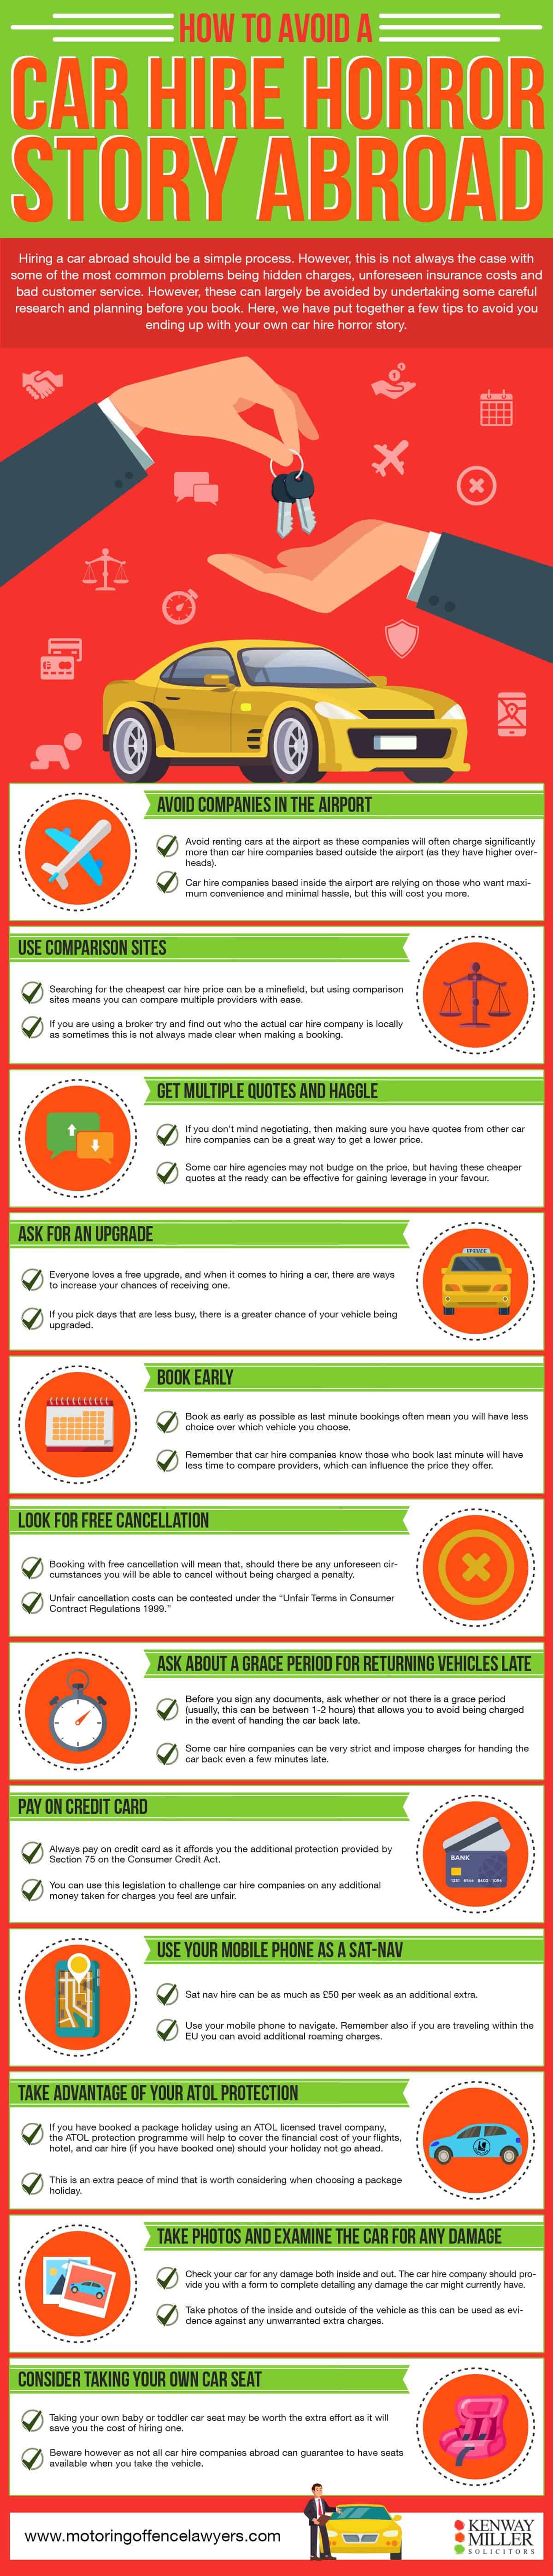 How To Avoid a Car Hire Horror Story Abroad infographic motoringoffencelawyers.com